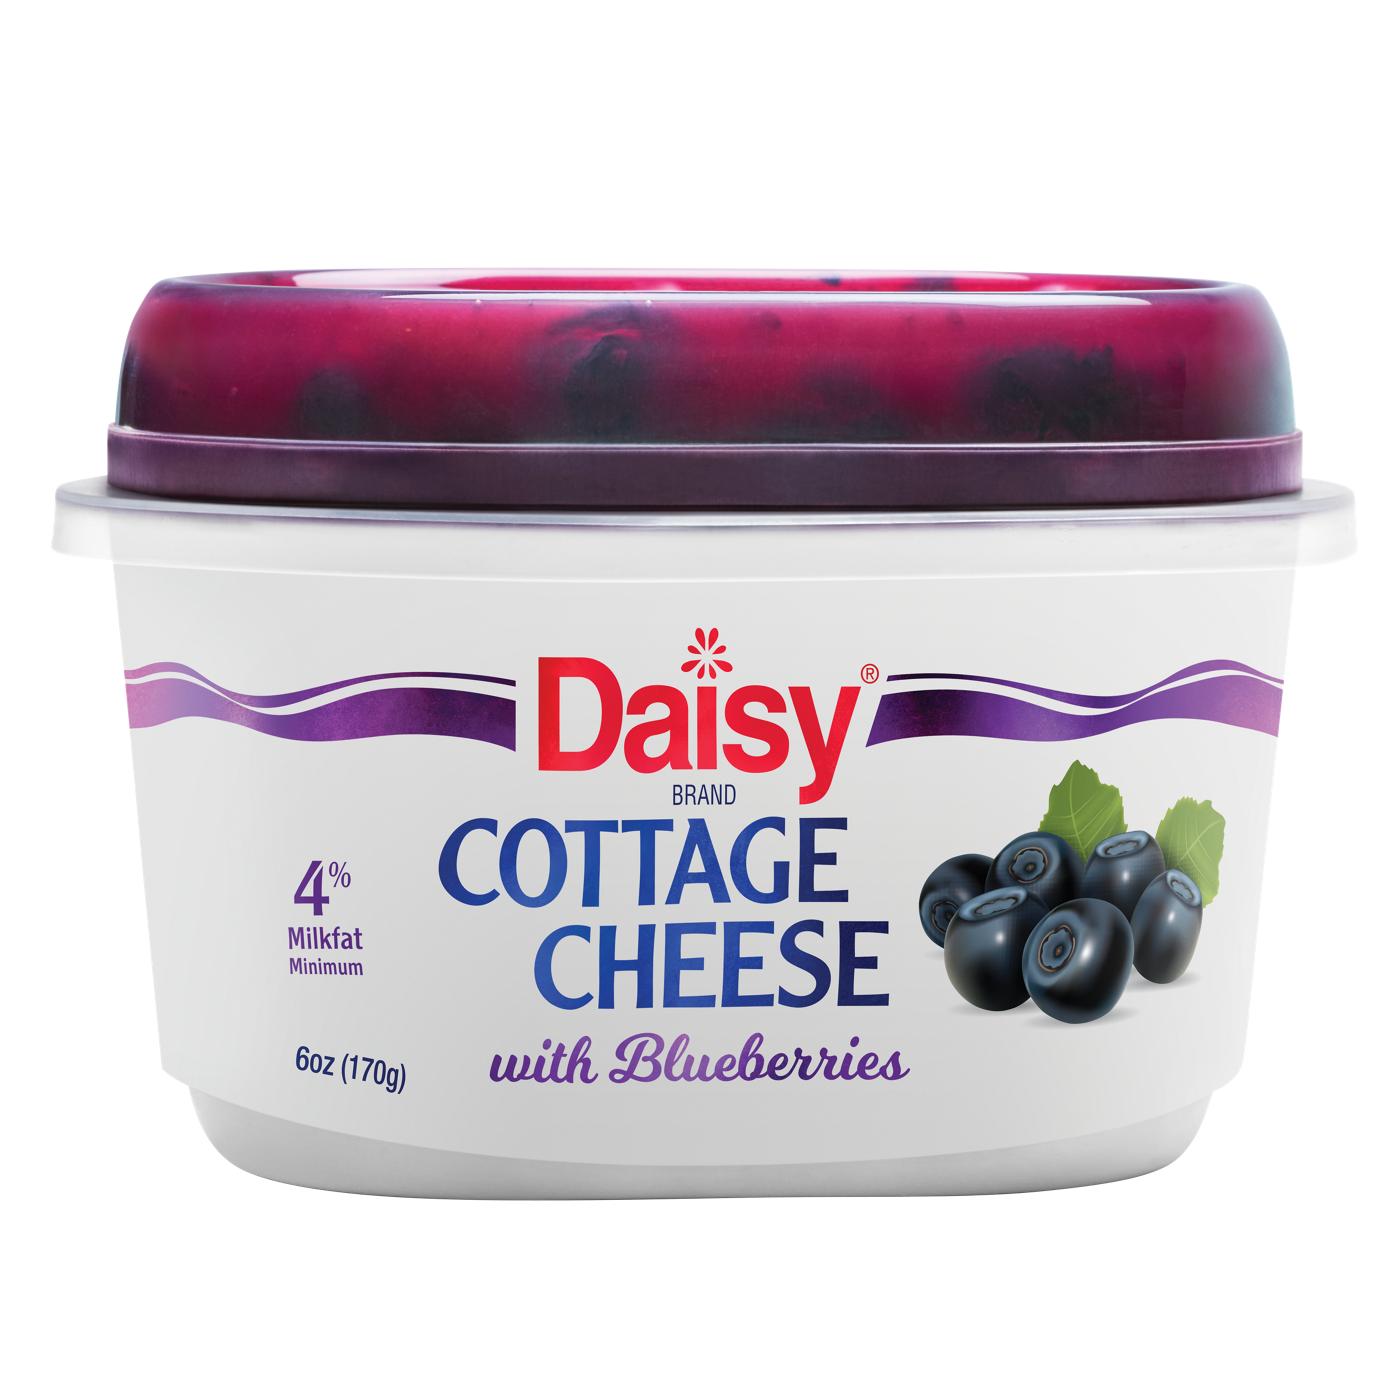 Daisy Cottage Cheese With Blueberries; image 1 of 5